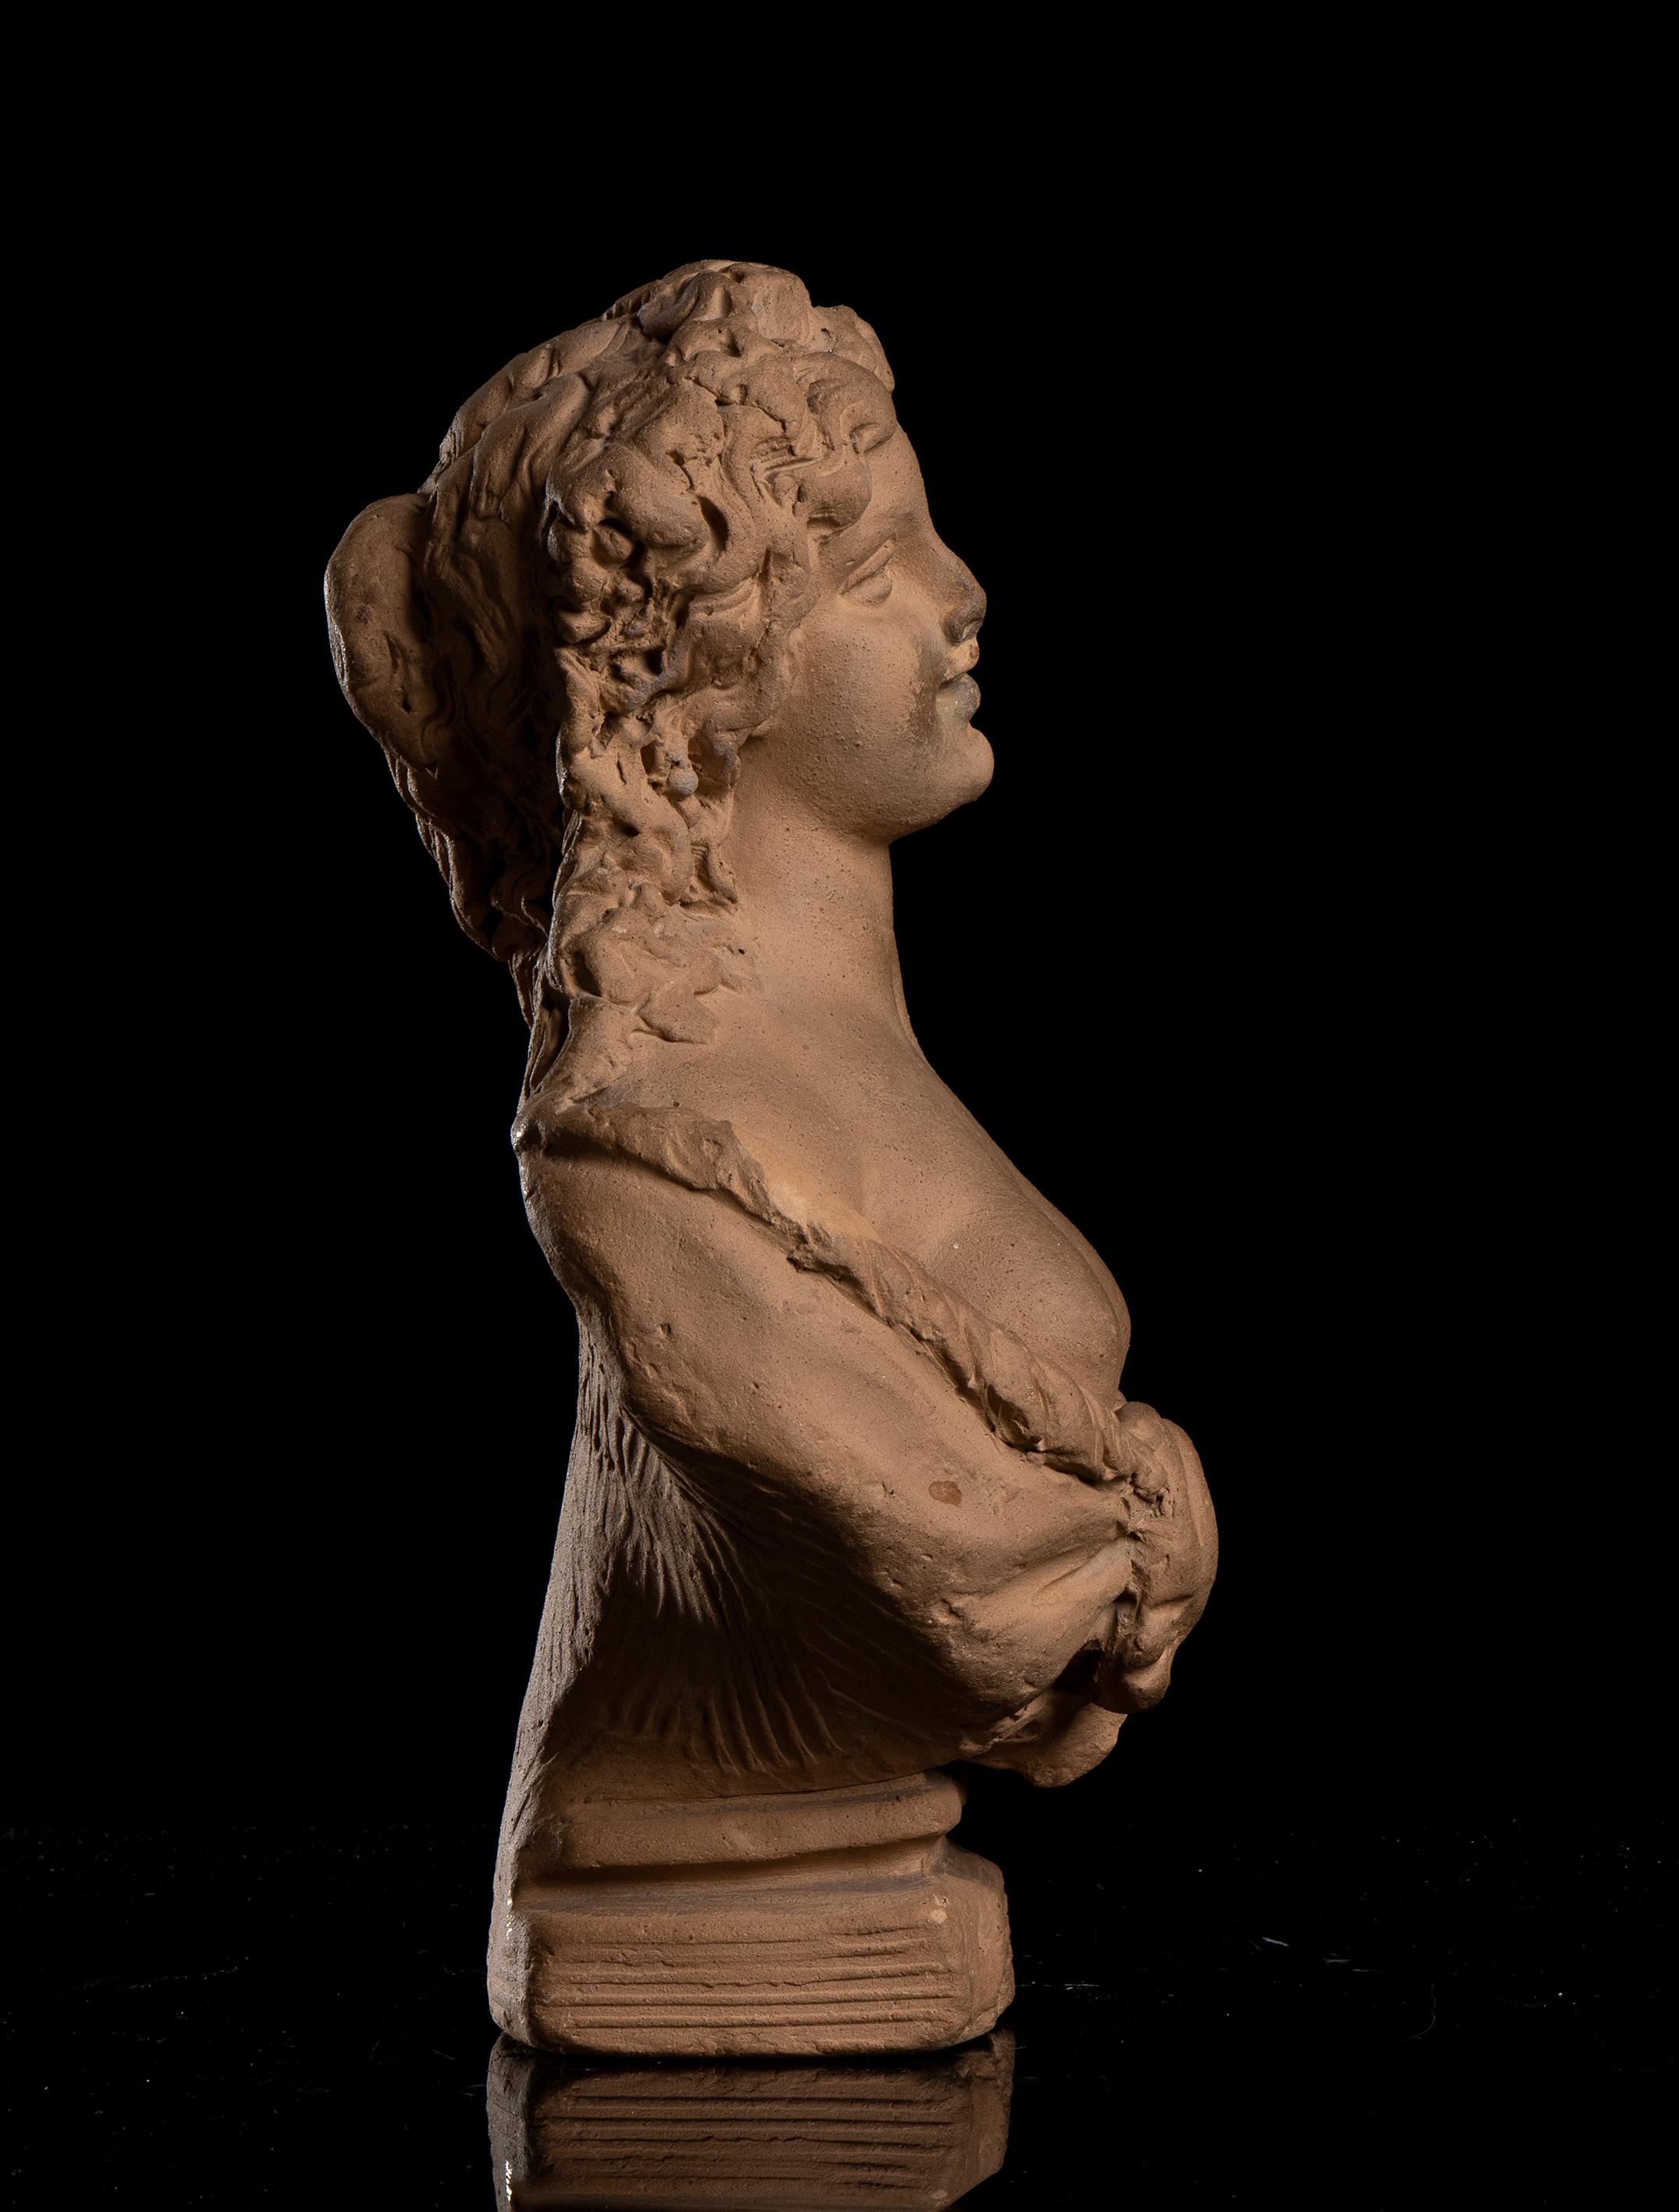 Nymph And Satyr Pair Of Sculptures Busts  By Lanzirotti Signed Terracotta 19th  For Sale 16